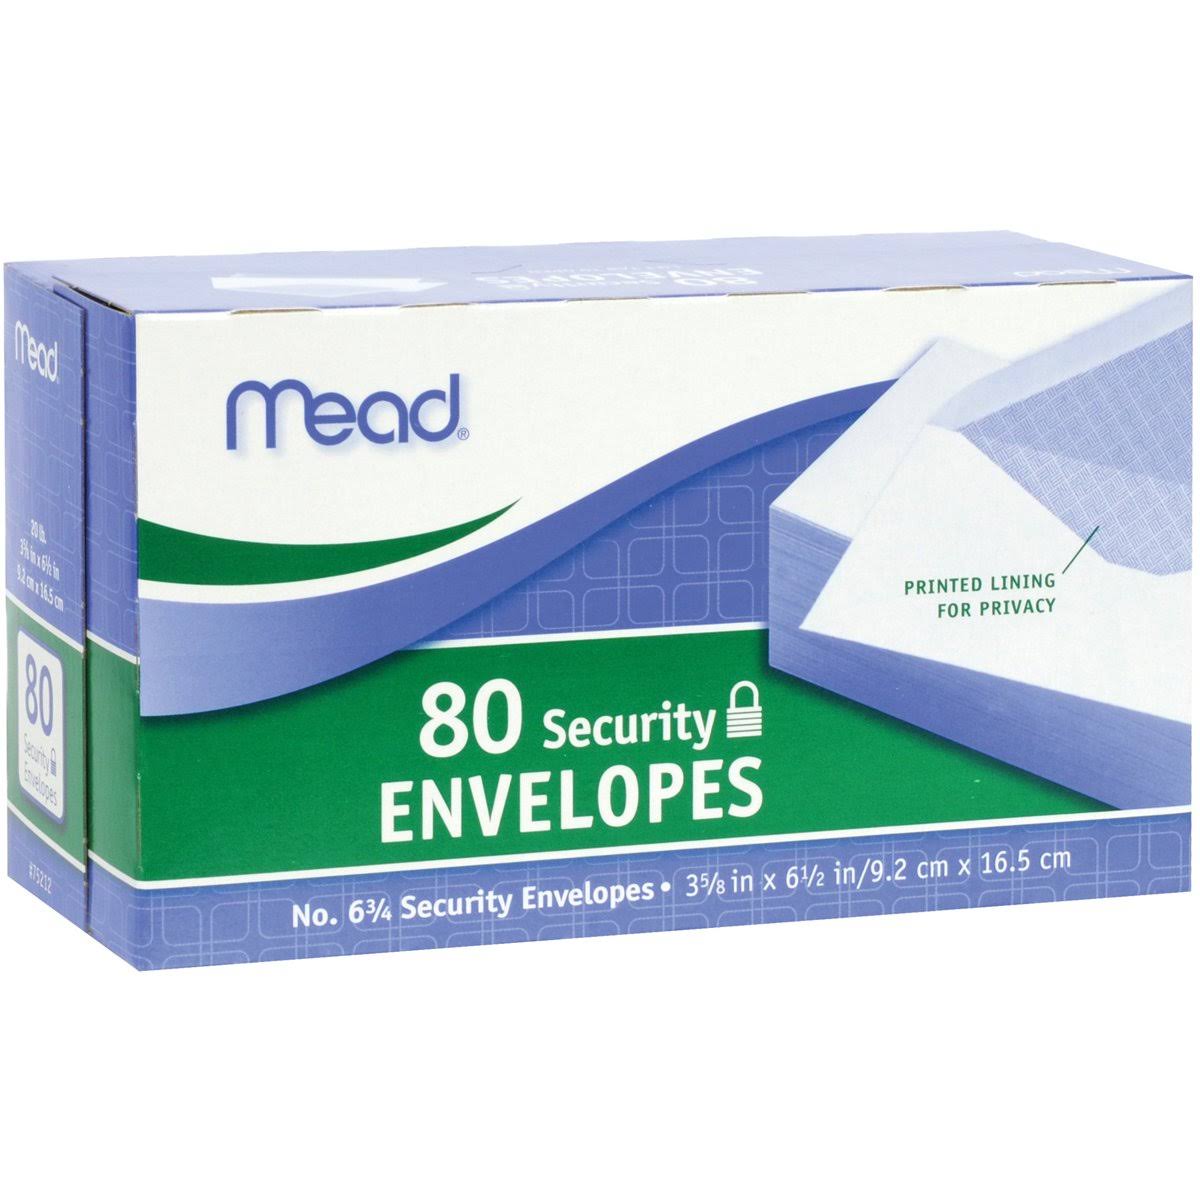 Mead Security Envelope - 80 Security Envelopes, White